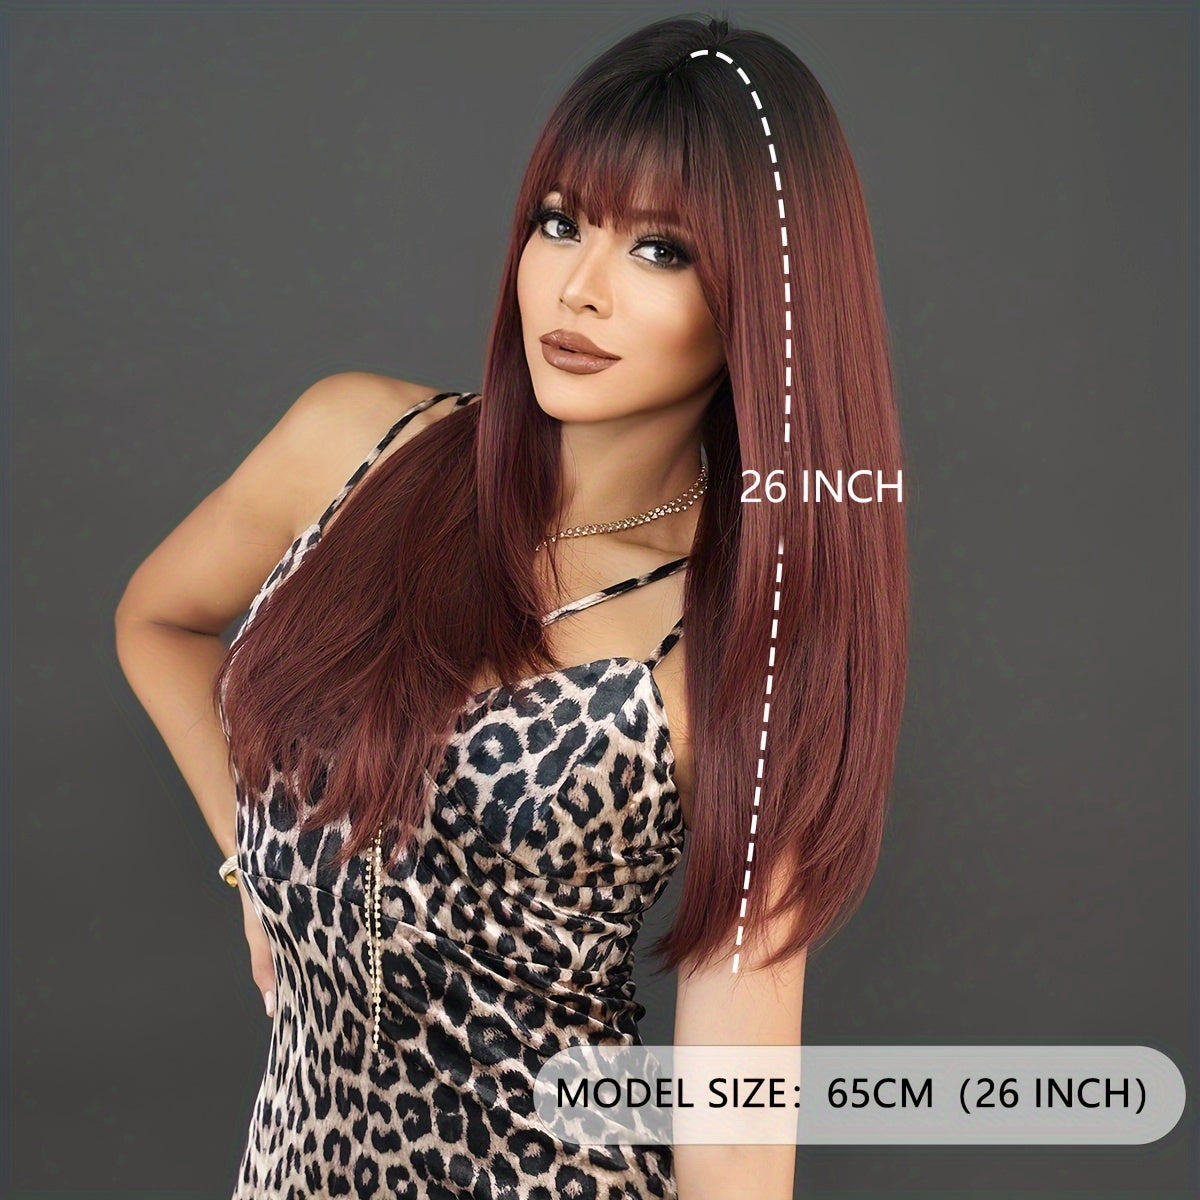 Long Straight Wine Red Wig For Women Daily Party Use Synthetic Layered Black Ombre Hair Wigs With Curtain Bangs Heat Resistant Fiber 66.04cm